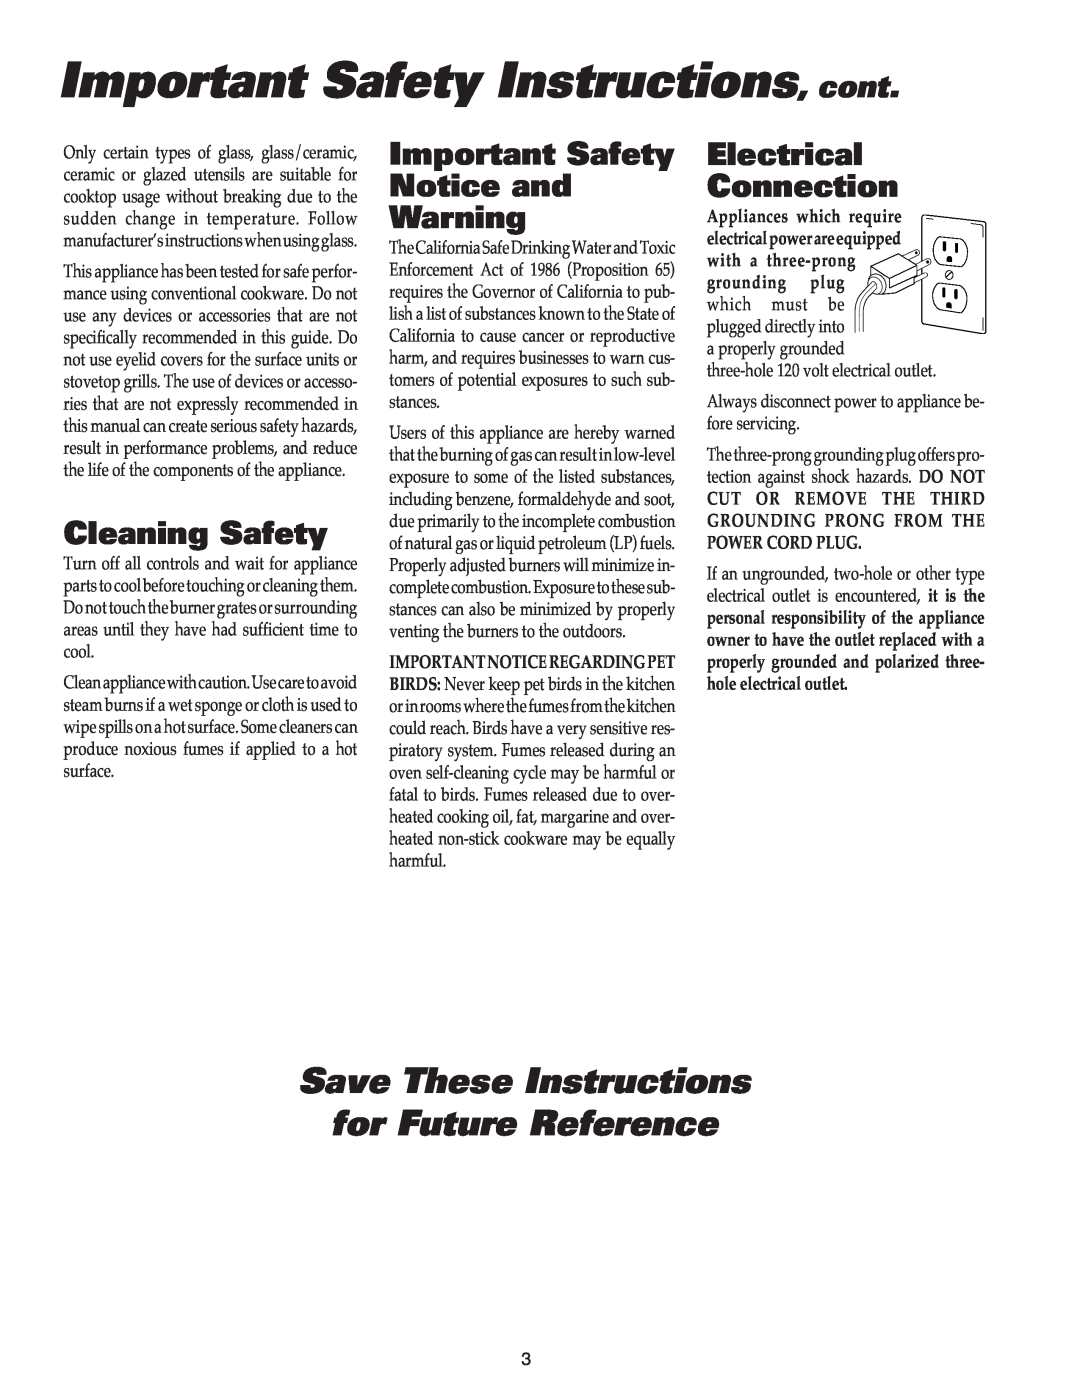 Maytag MGC4436BDB Important Safety Instructions, cont, Save These Instructions for Future Reference, Cleaning Safety 